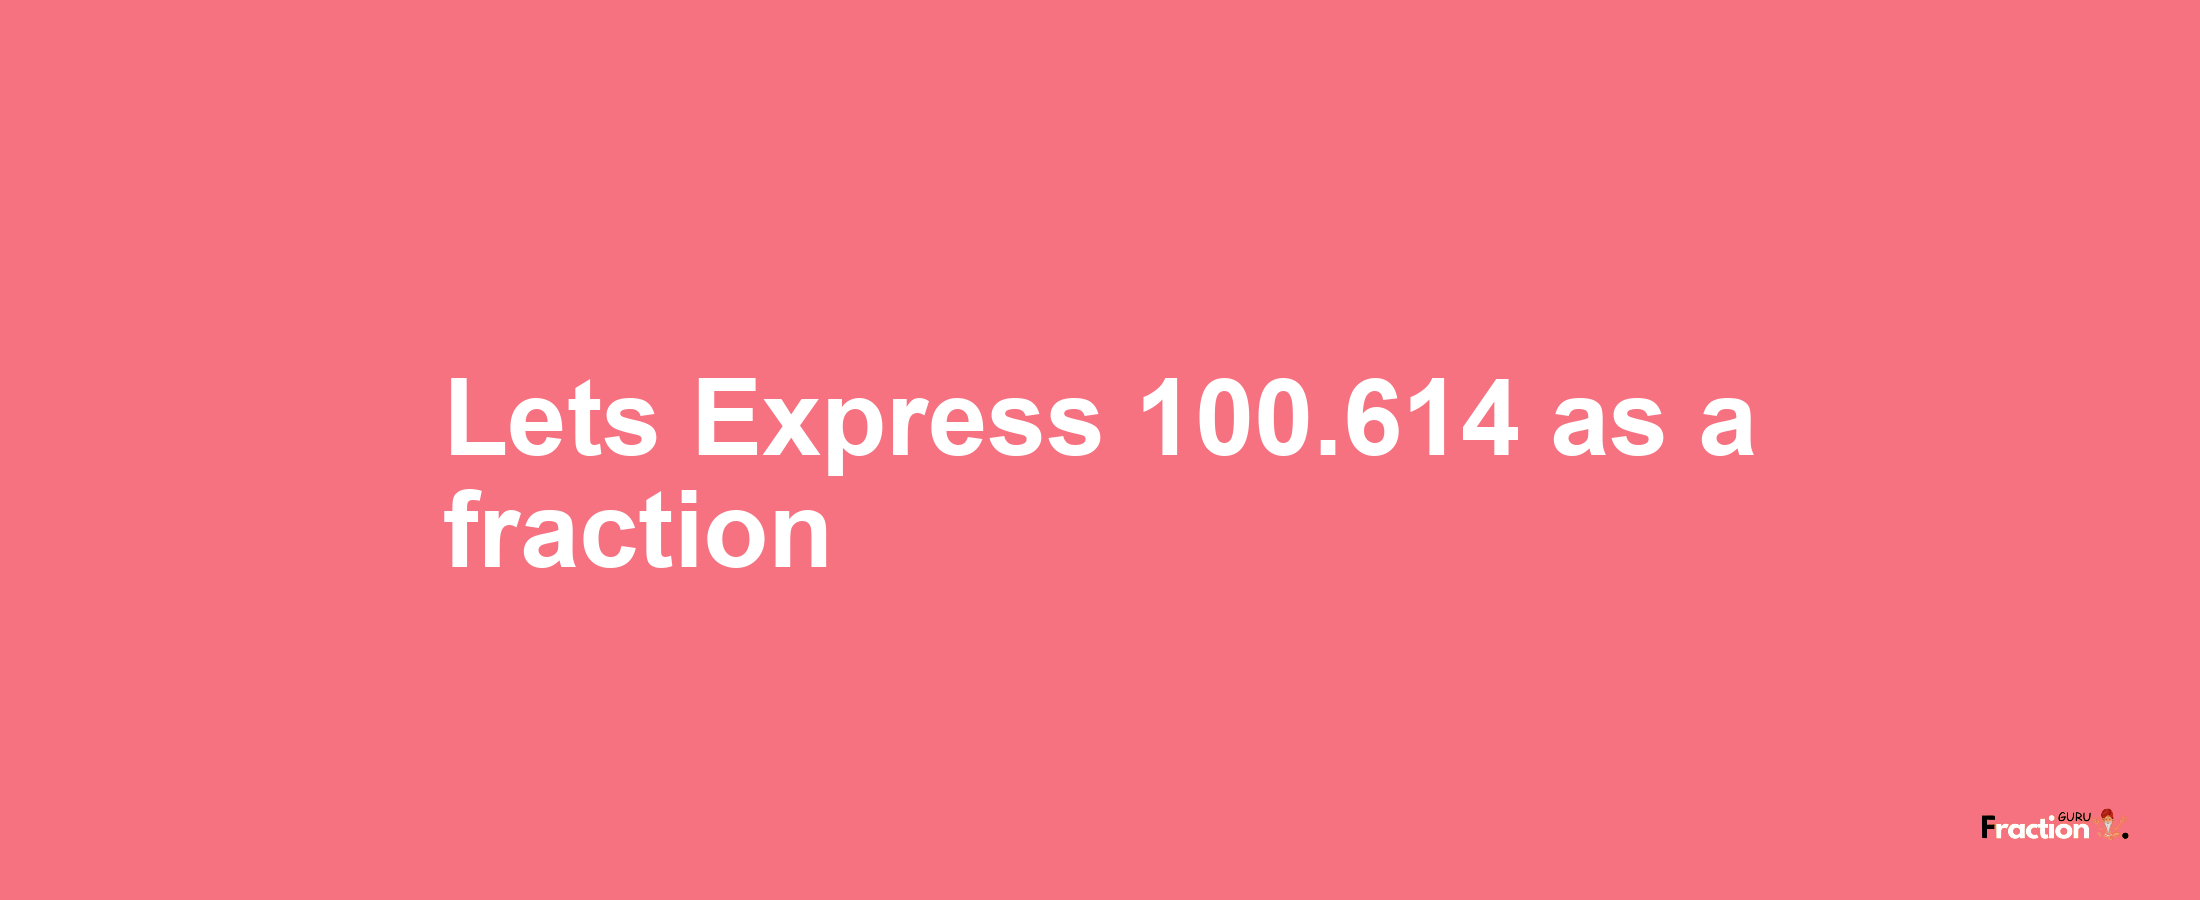 Lets Express 100.614 as afraction